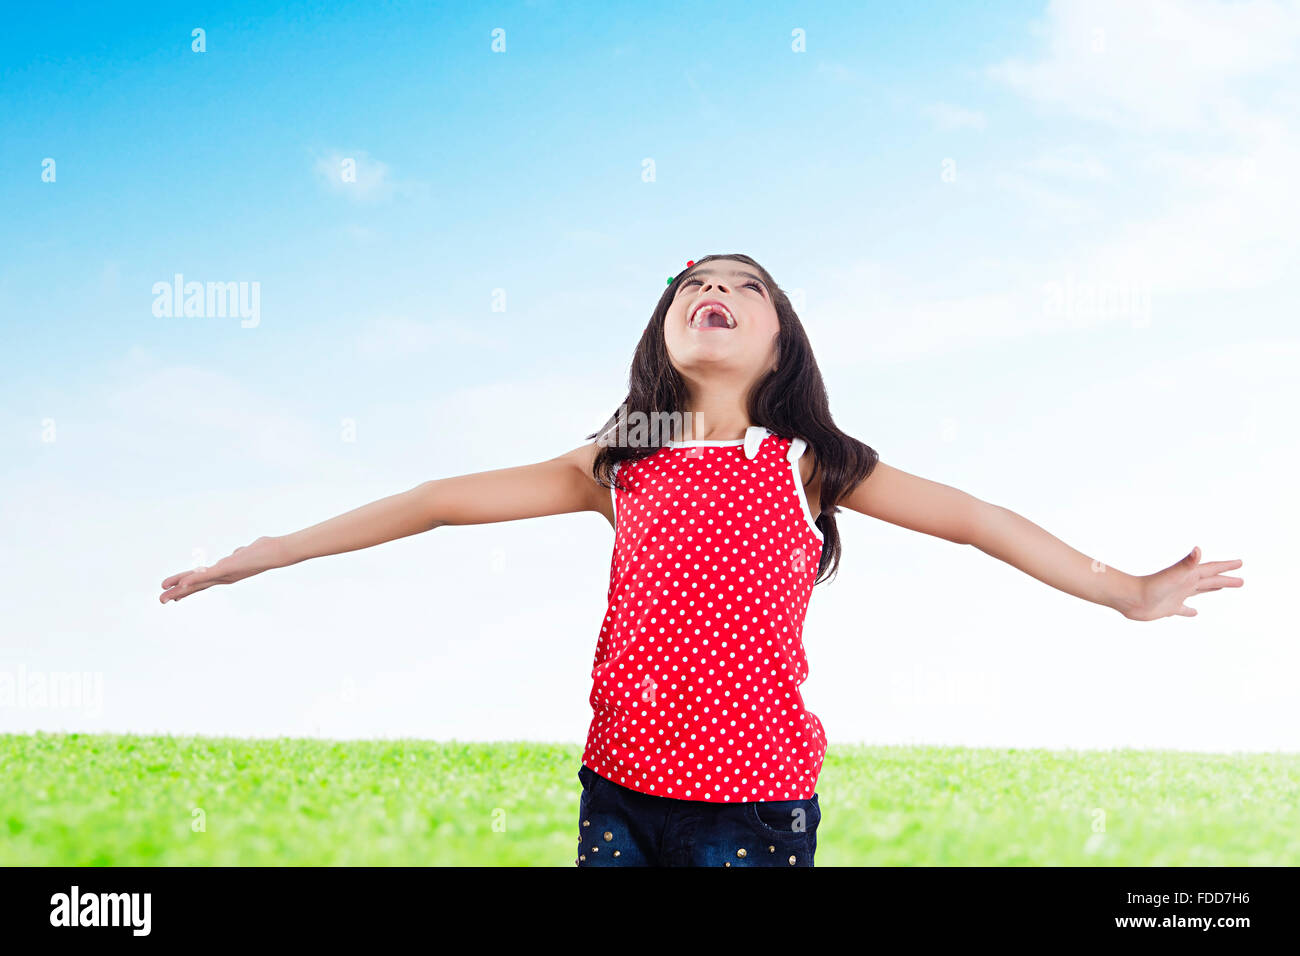 1 Child Gir Park Standing Looking up Watching Stock Photo